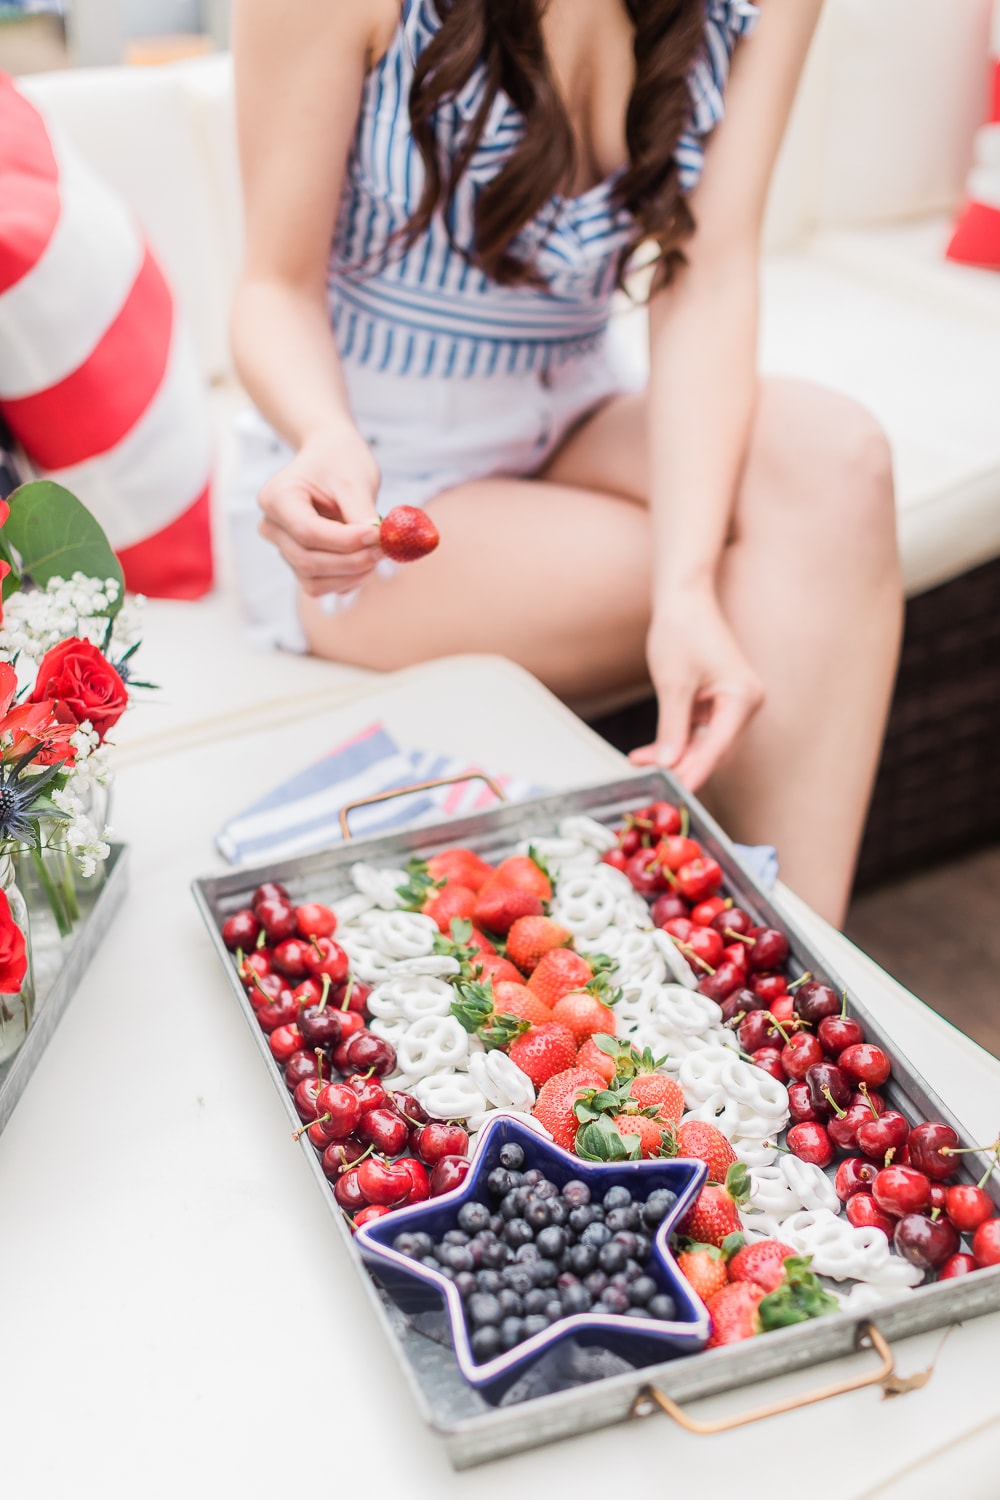 Blogger Stephanie Ziajka shares one of her favorite 4th of July snack ideas on Diary of a Debutante